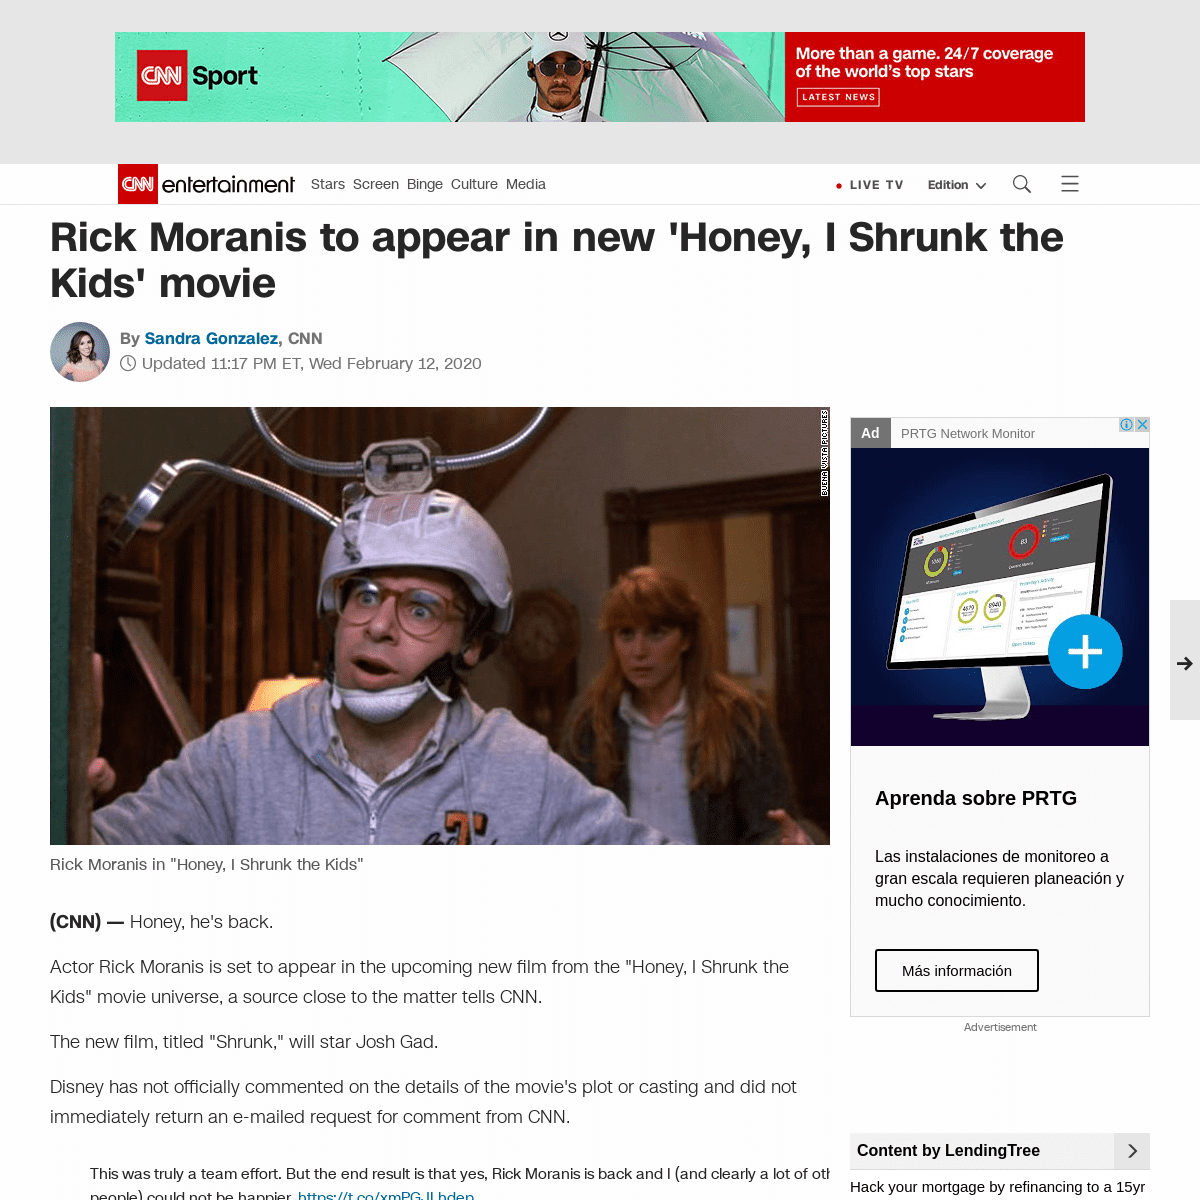 A complete backup of www.cnn.com/2020/02/12/entertainment/rick-moranis/index.html